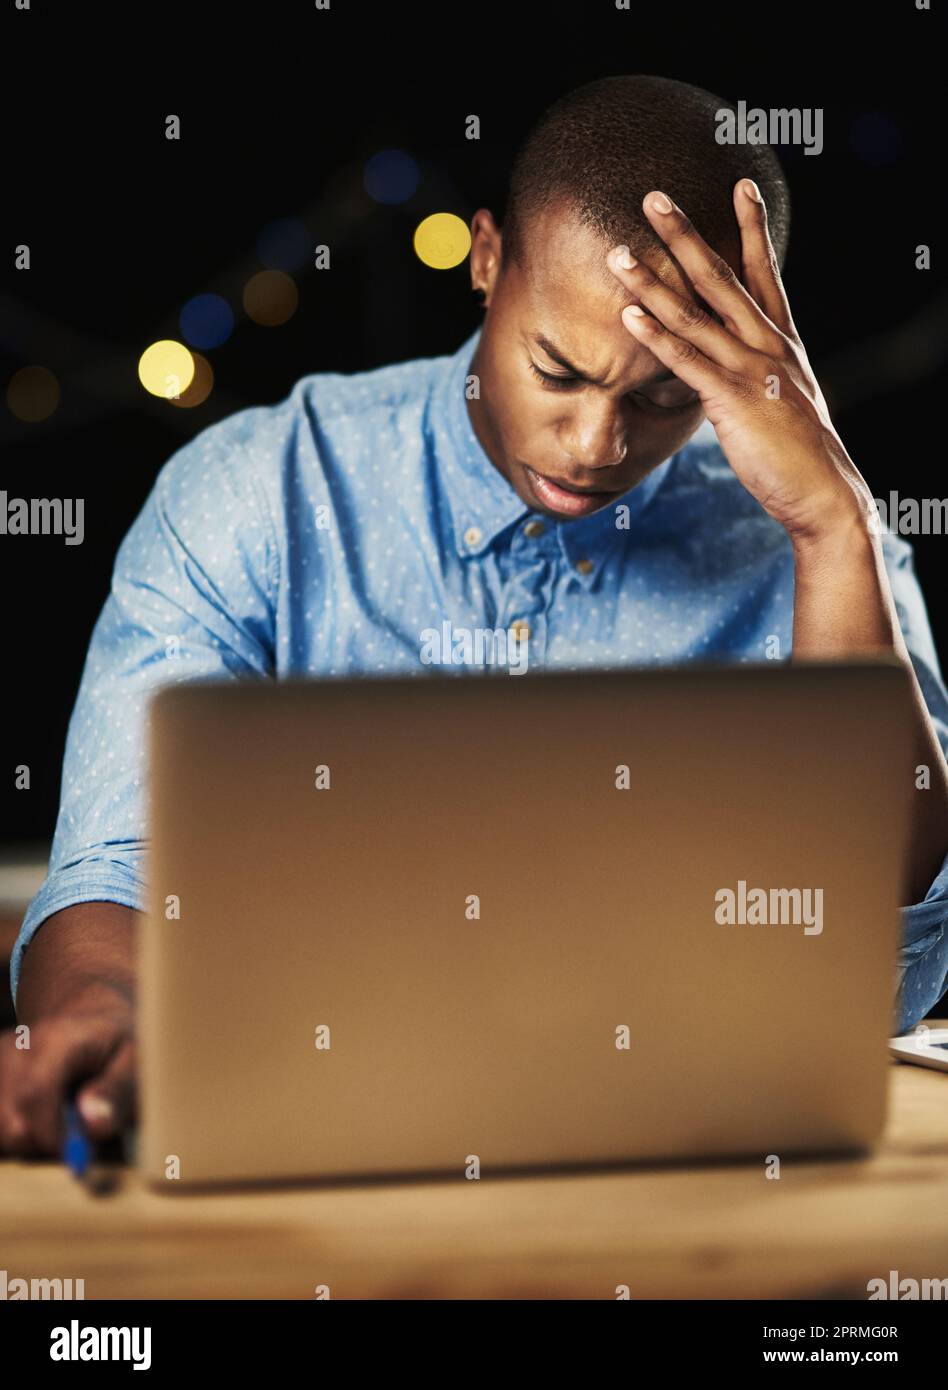 Running out of time. a young man looking stressed while working late night on his laptop. Stock Photo